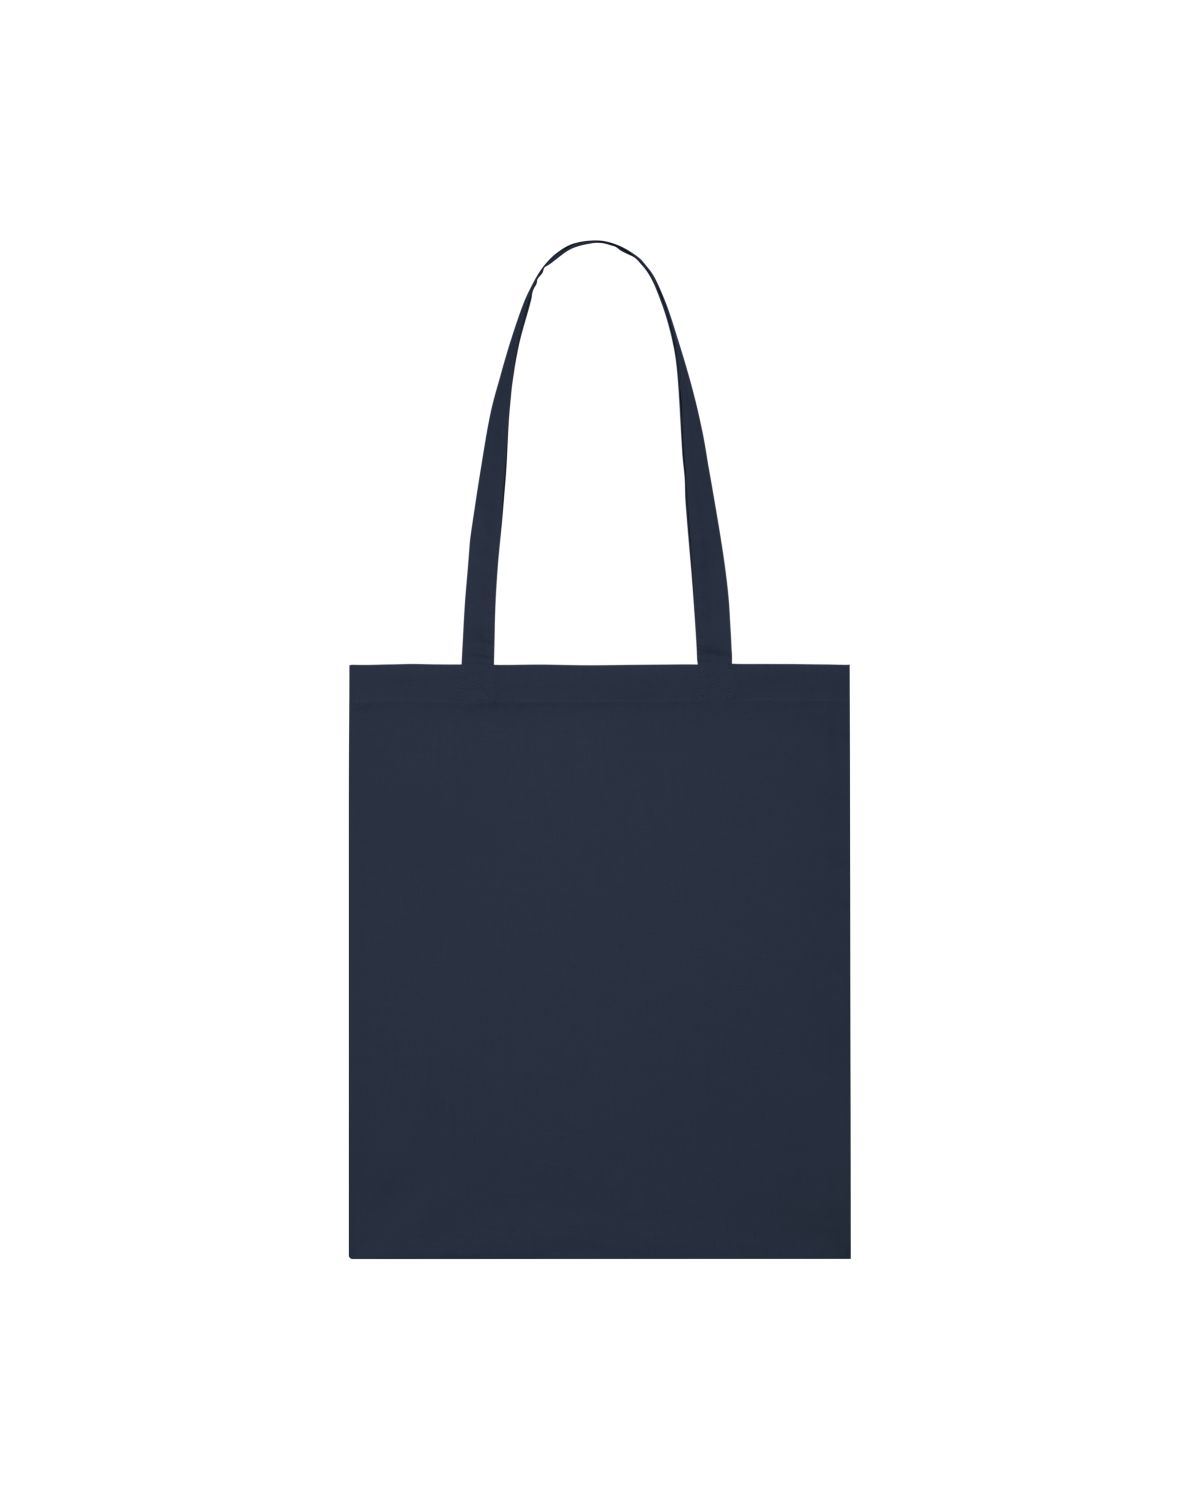 customize your own tote bag